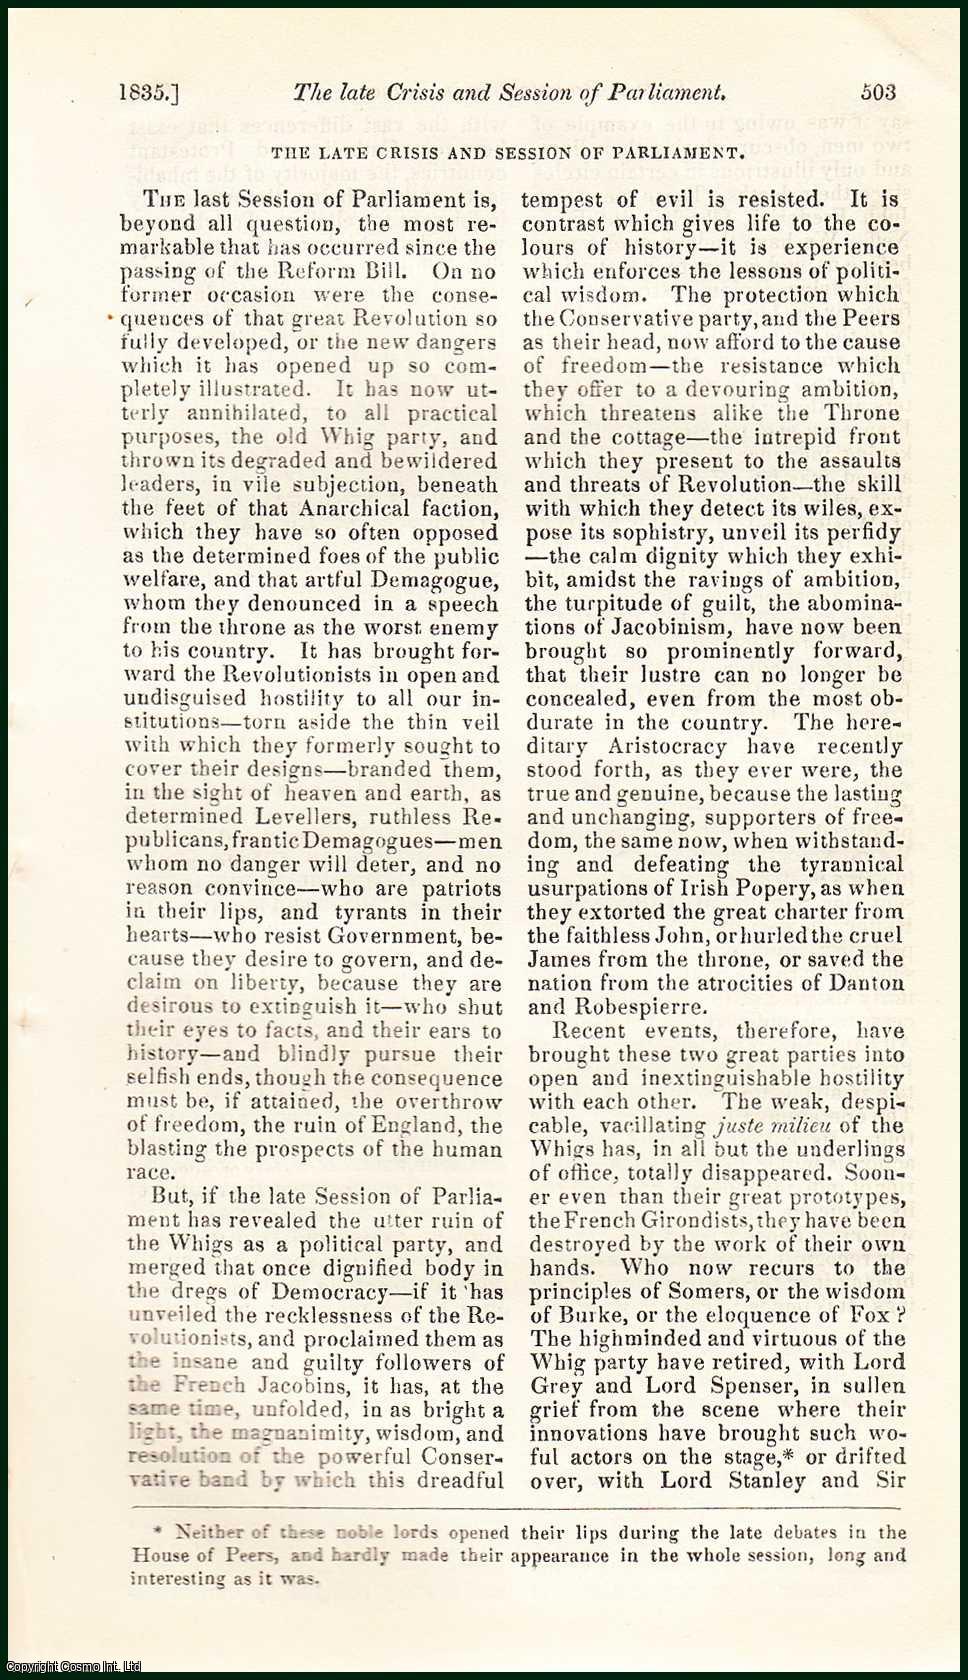 Archibald Alison - The Late Crisis and Session of Parliament. An uncommon original article from the Blackwood's Edinburgh Magazine, 1835.